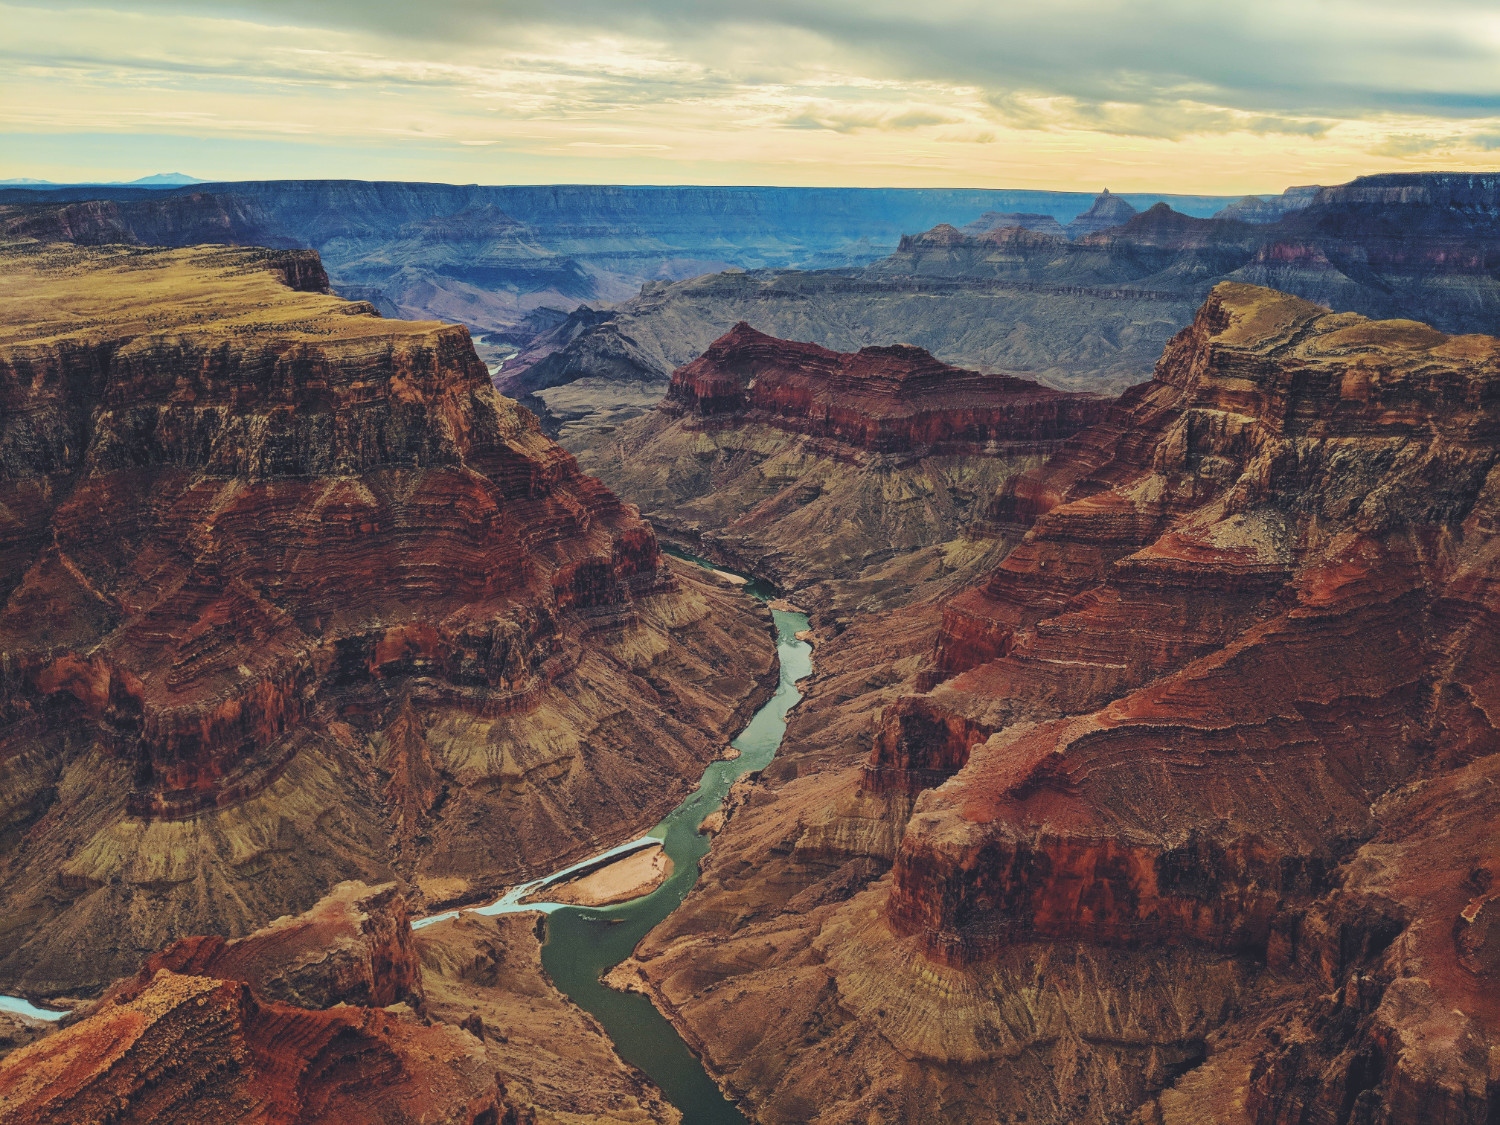 Grand Canyon arial view with sights of the Colorado River